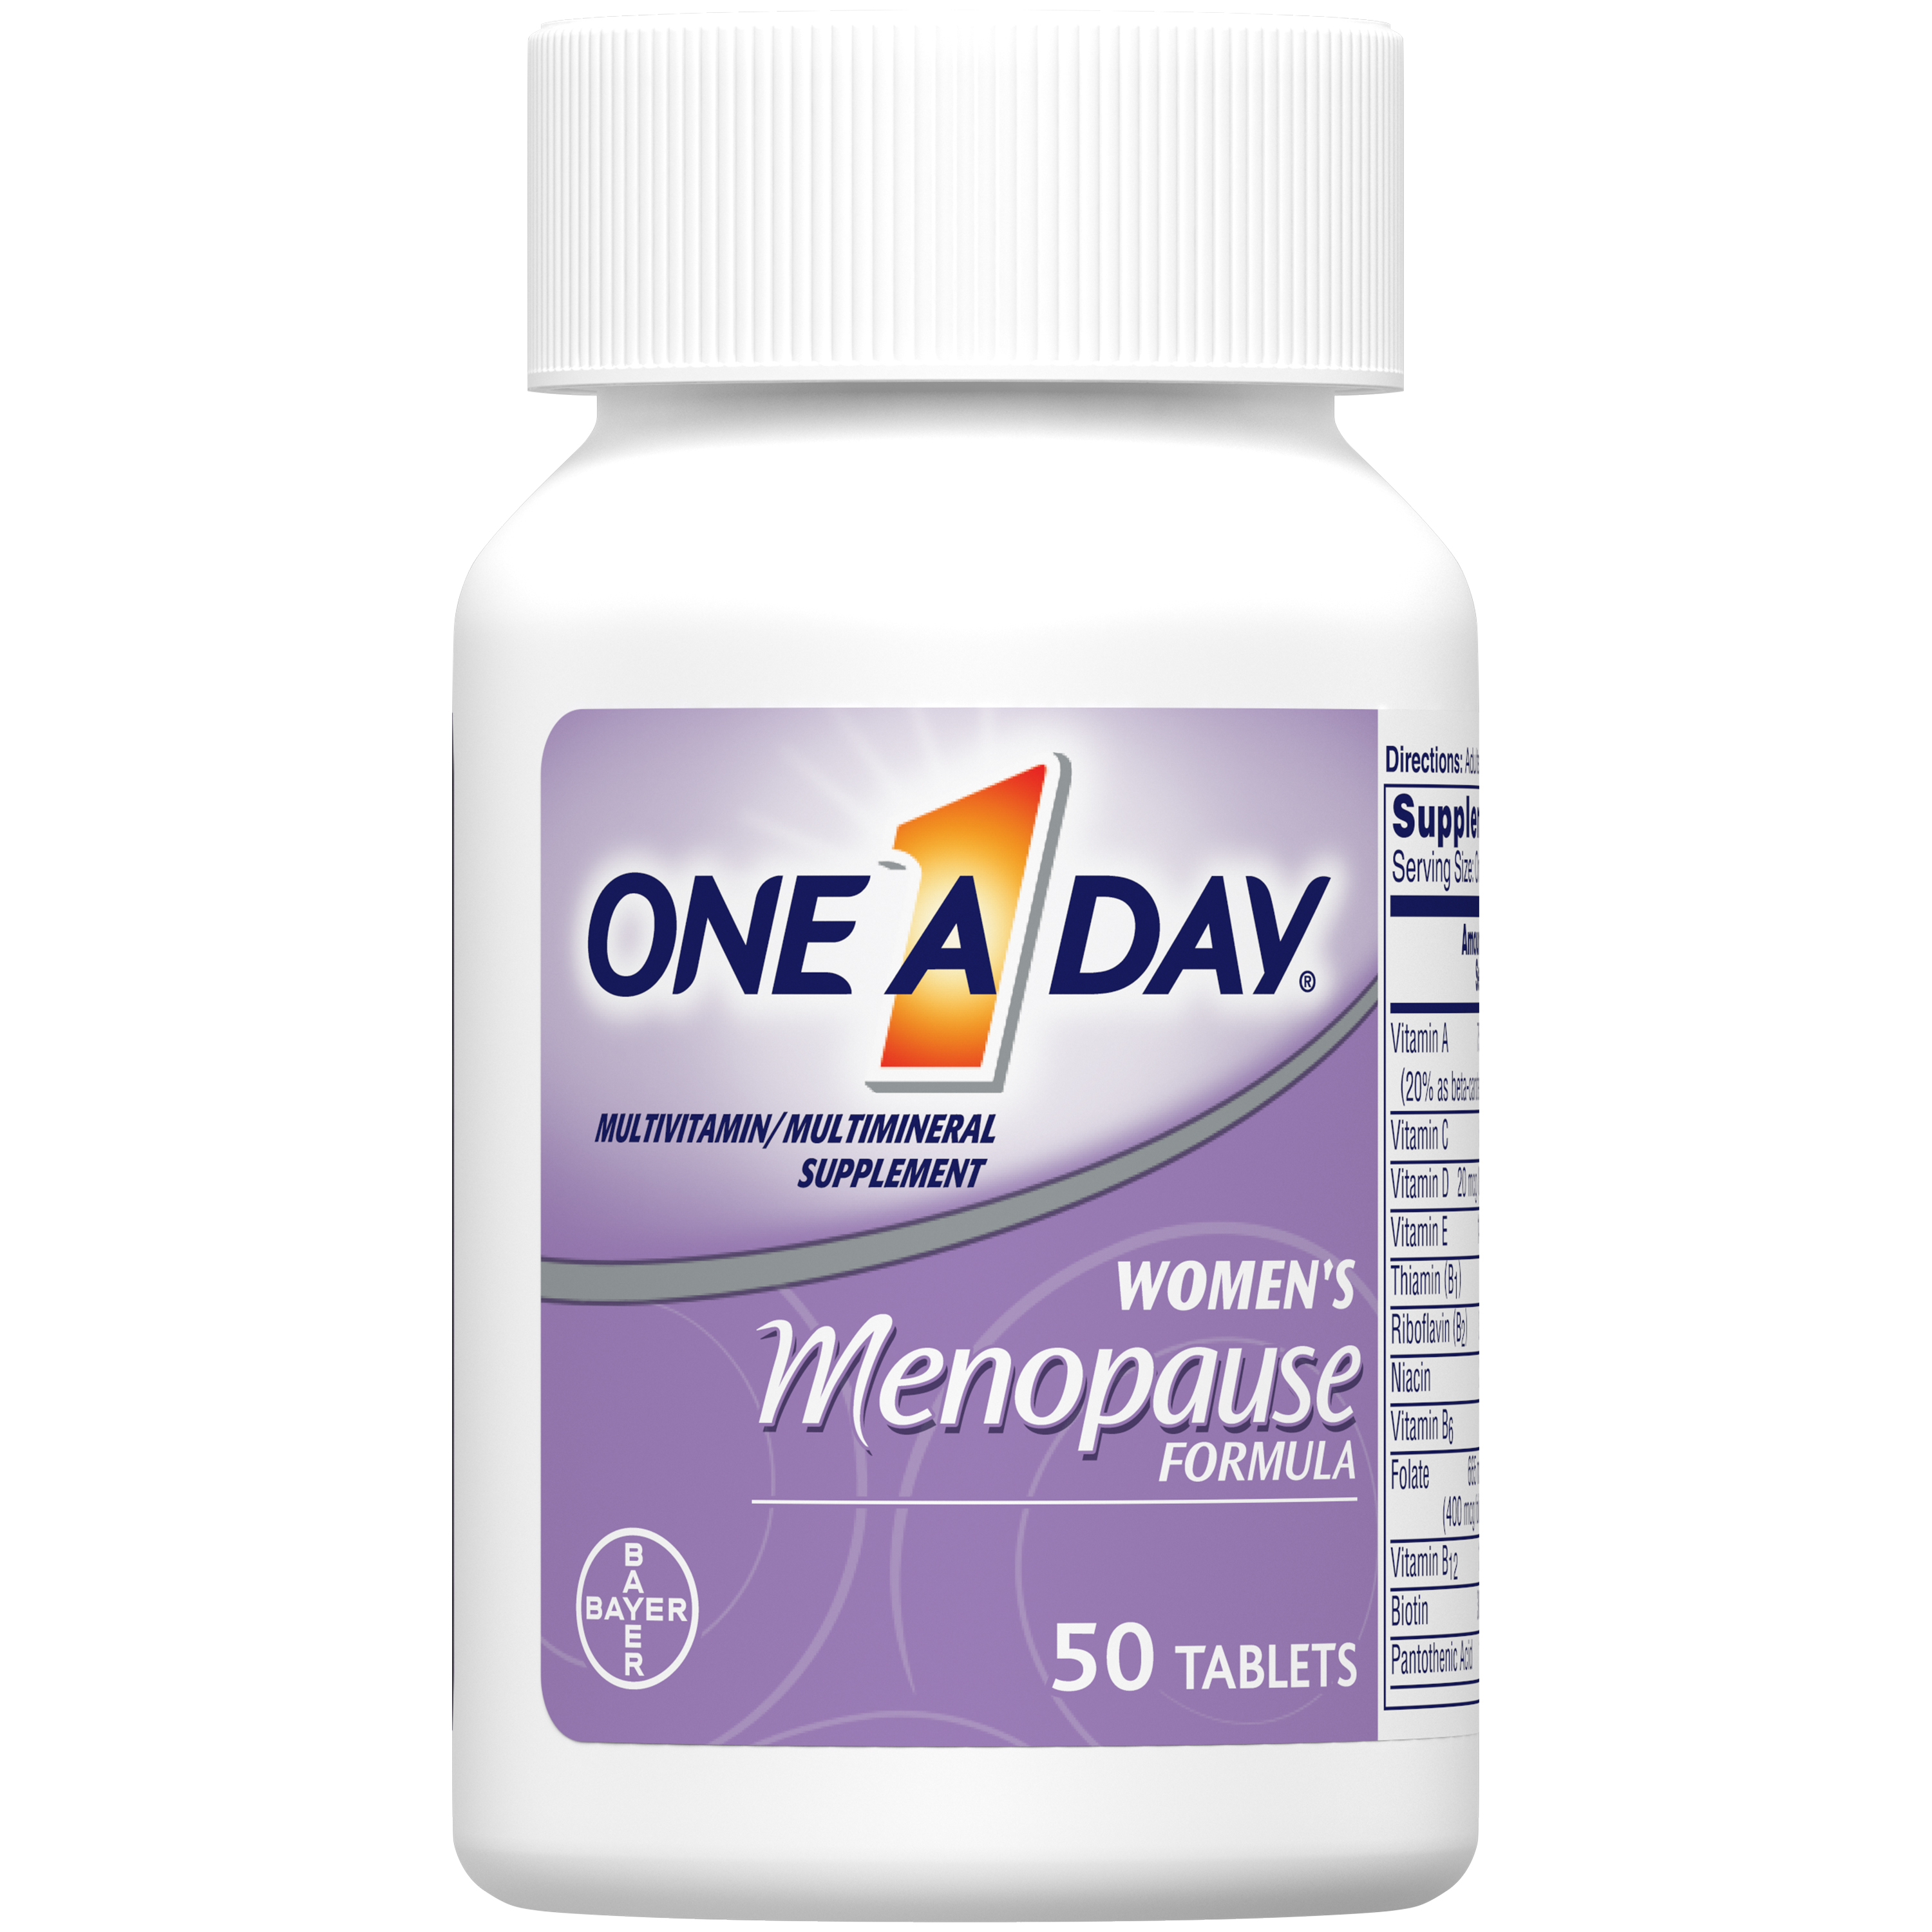 One A Day Women's Menopause Formula Multivitamin Tablets, 50 Count - image 4 of 10